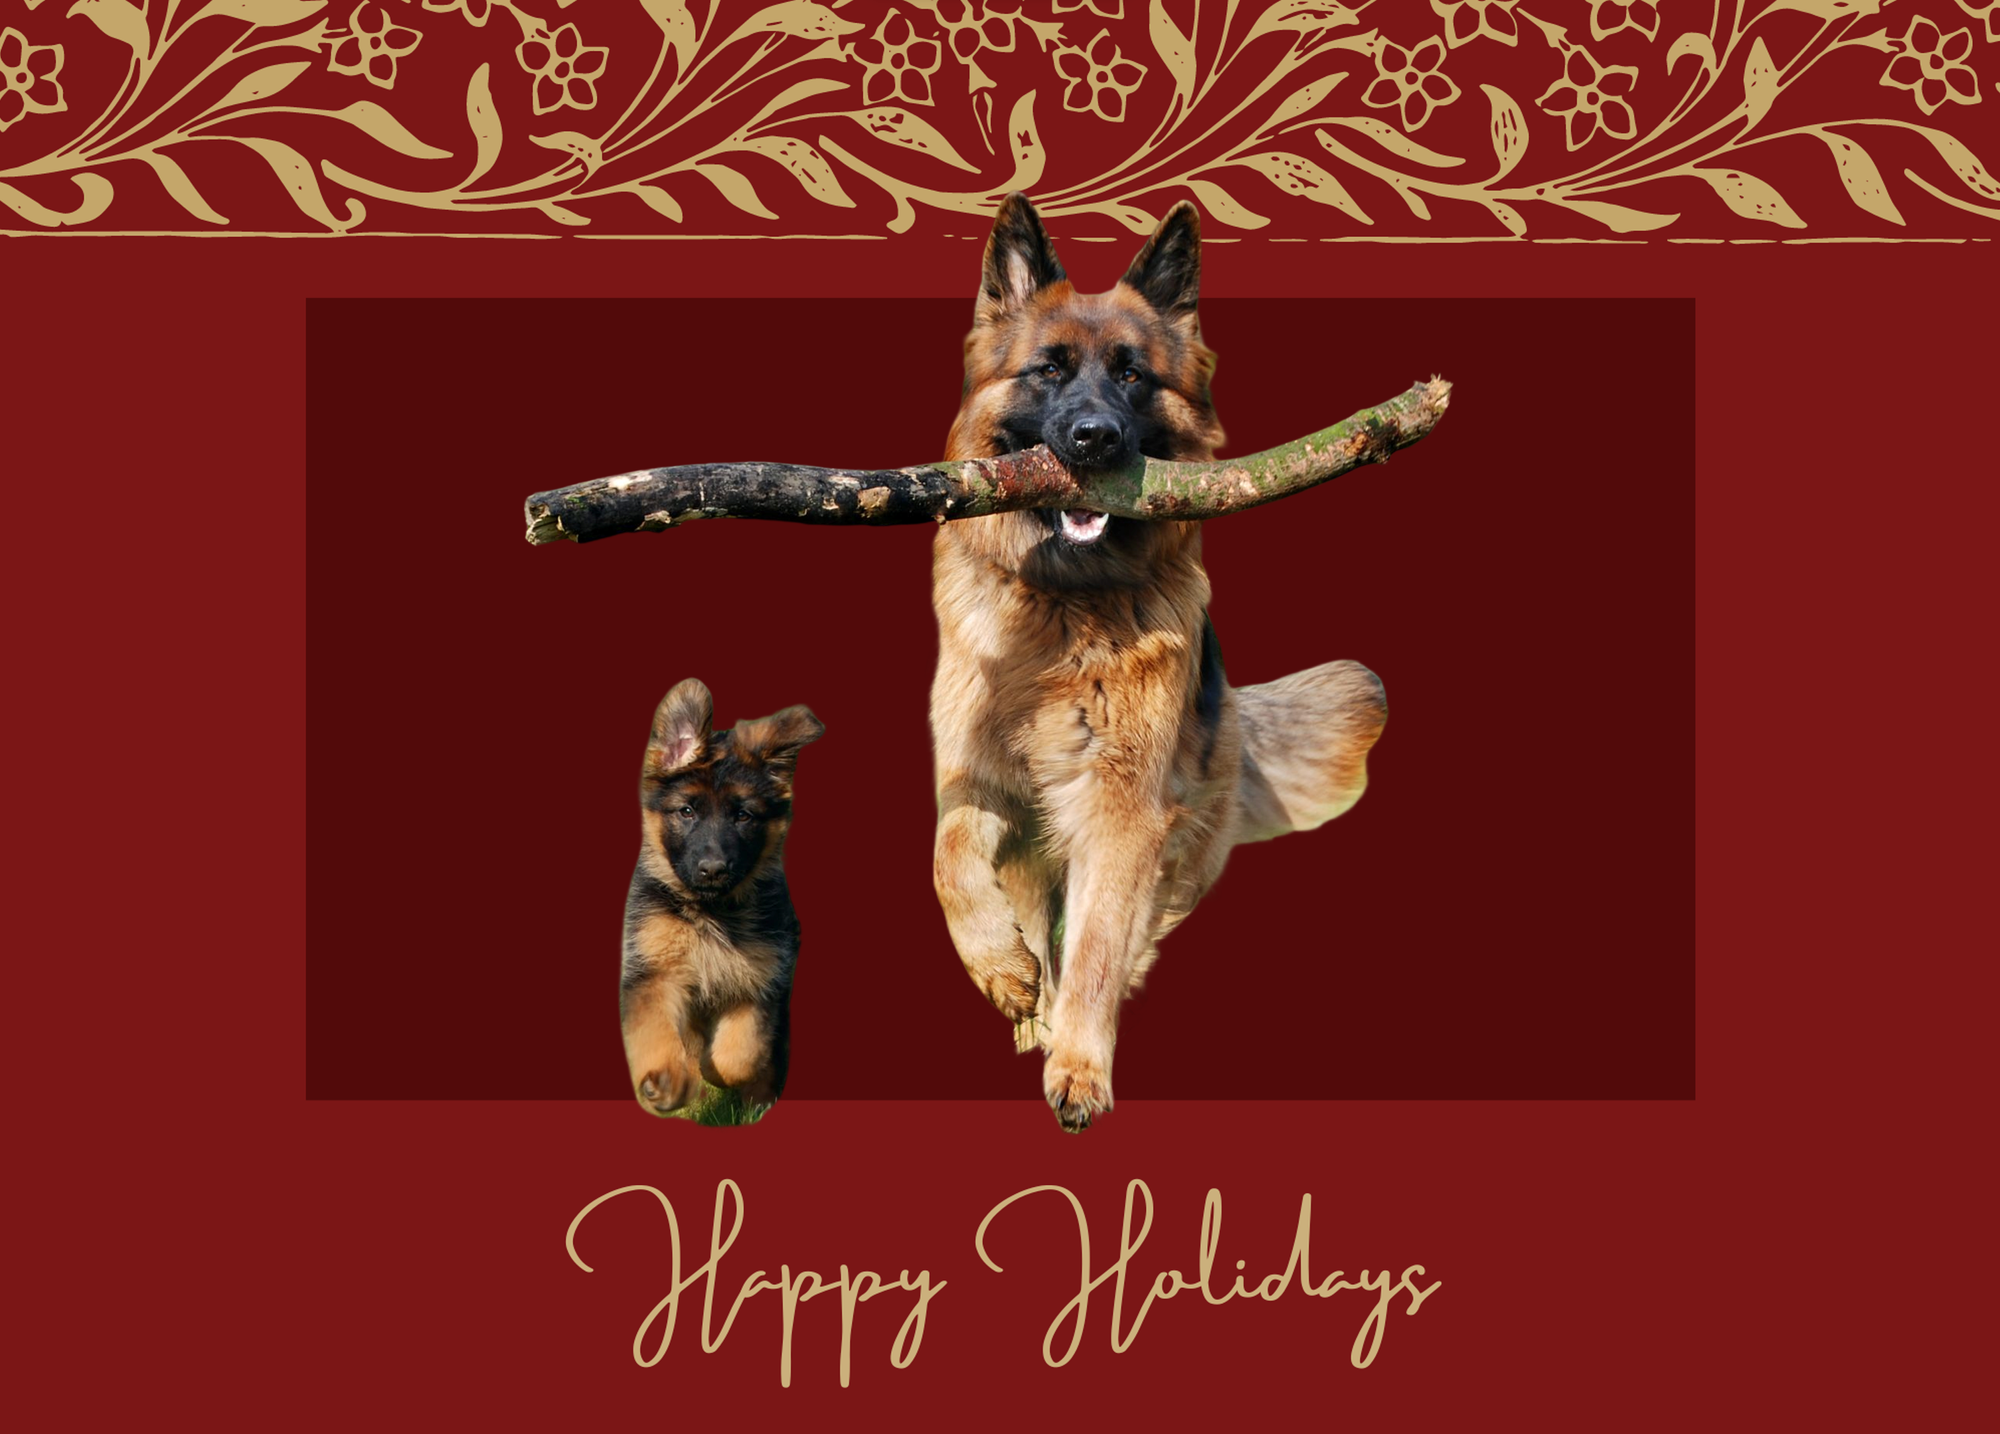 A holiday card with the writing "Happy Holidays" and the cut out dogs superimposed on top.